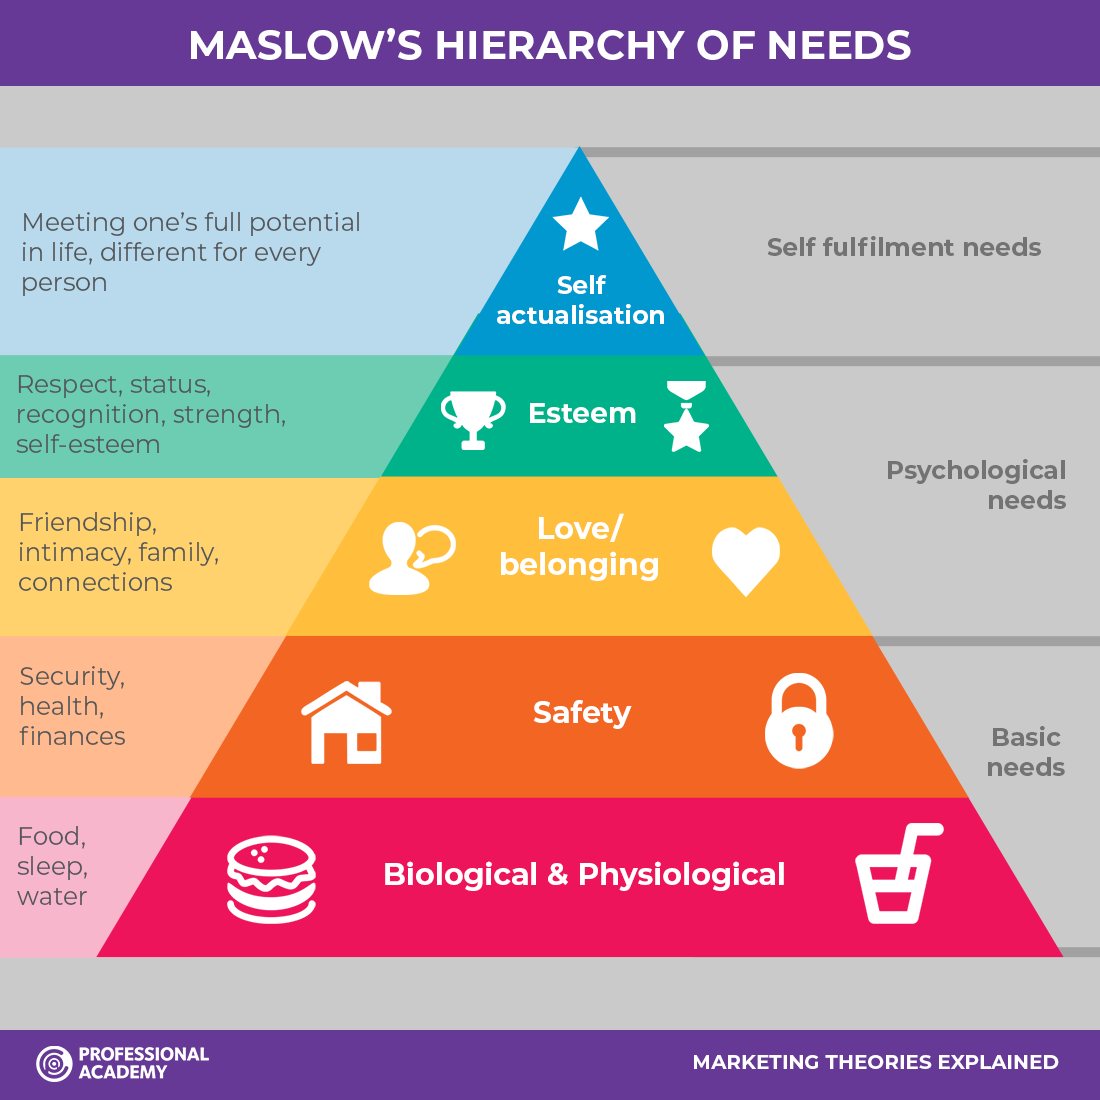 Maslow's Hierarchy of Needs - shows the different levels of human motivation that can be used as driver when making purchase decisions.